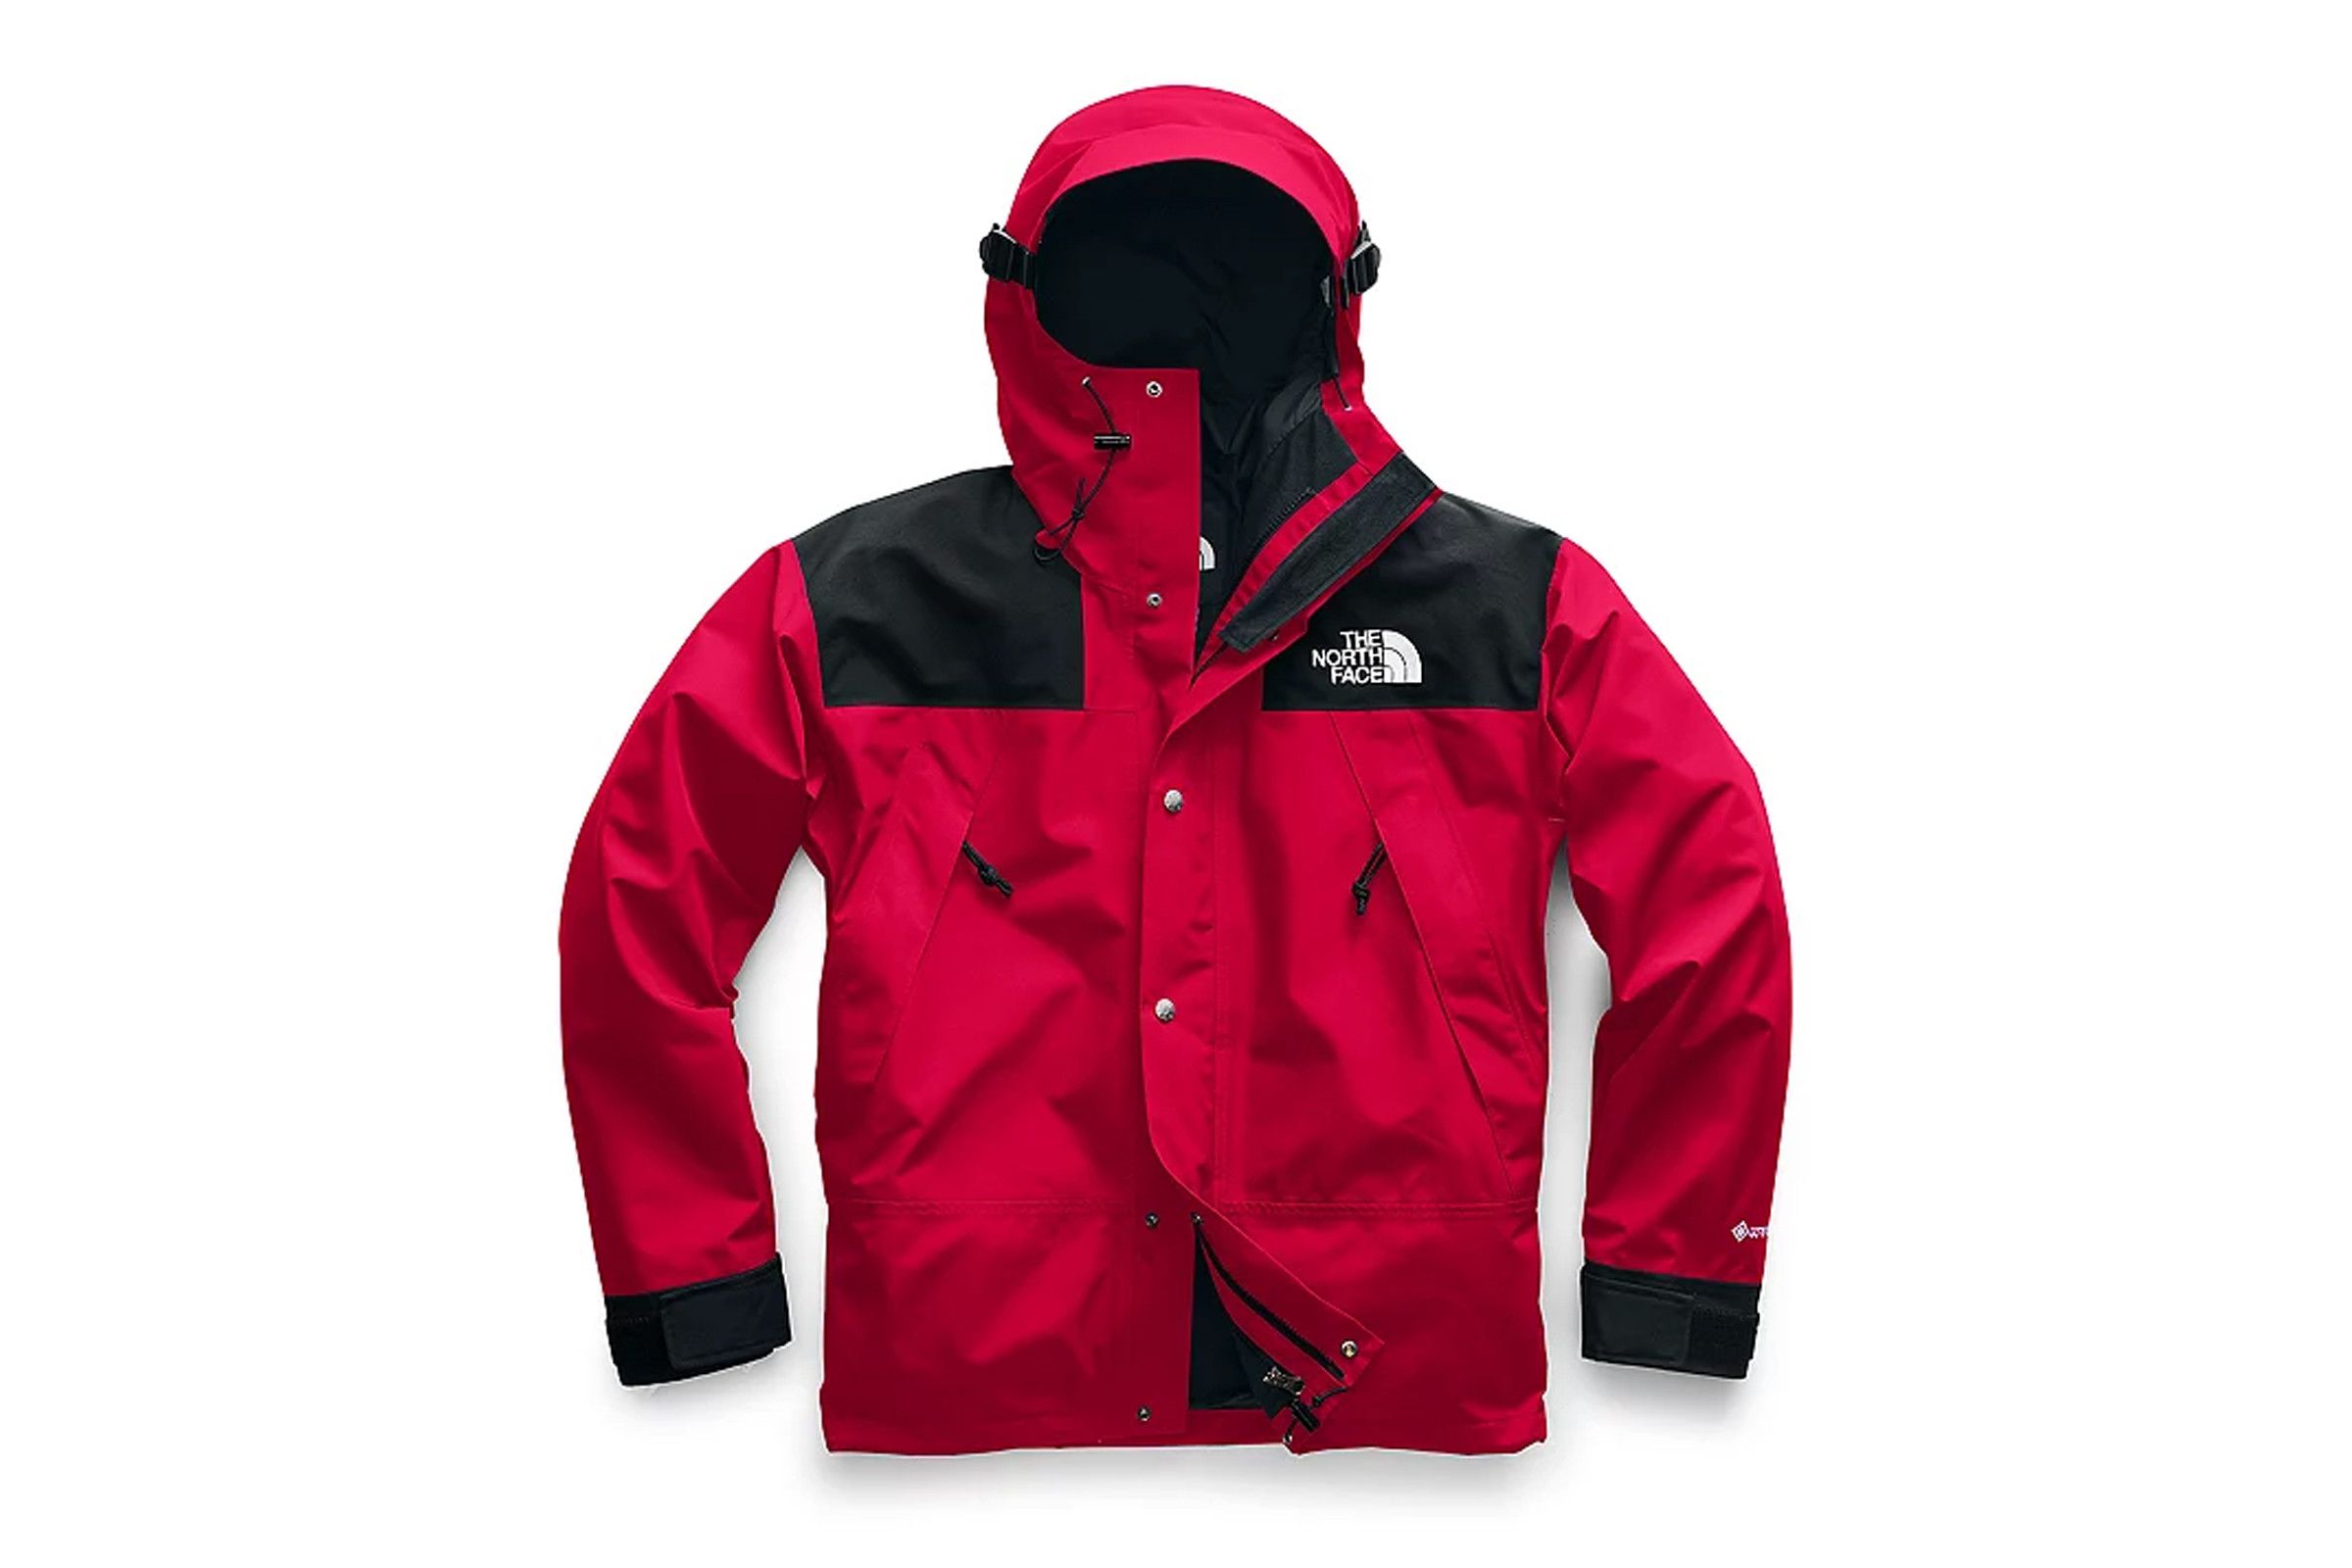 The North Face Mountain Jacket History | Grailed